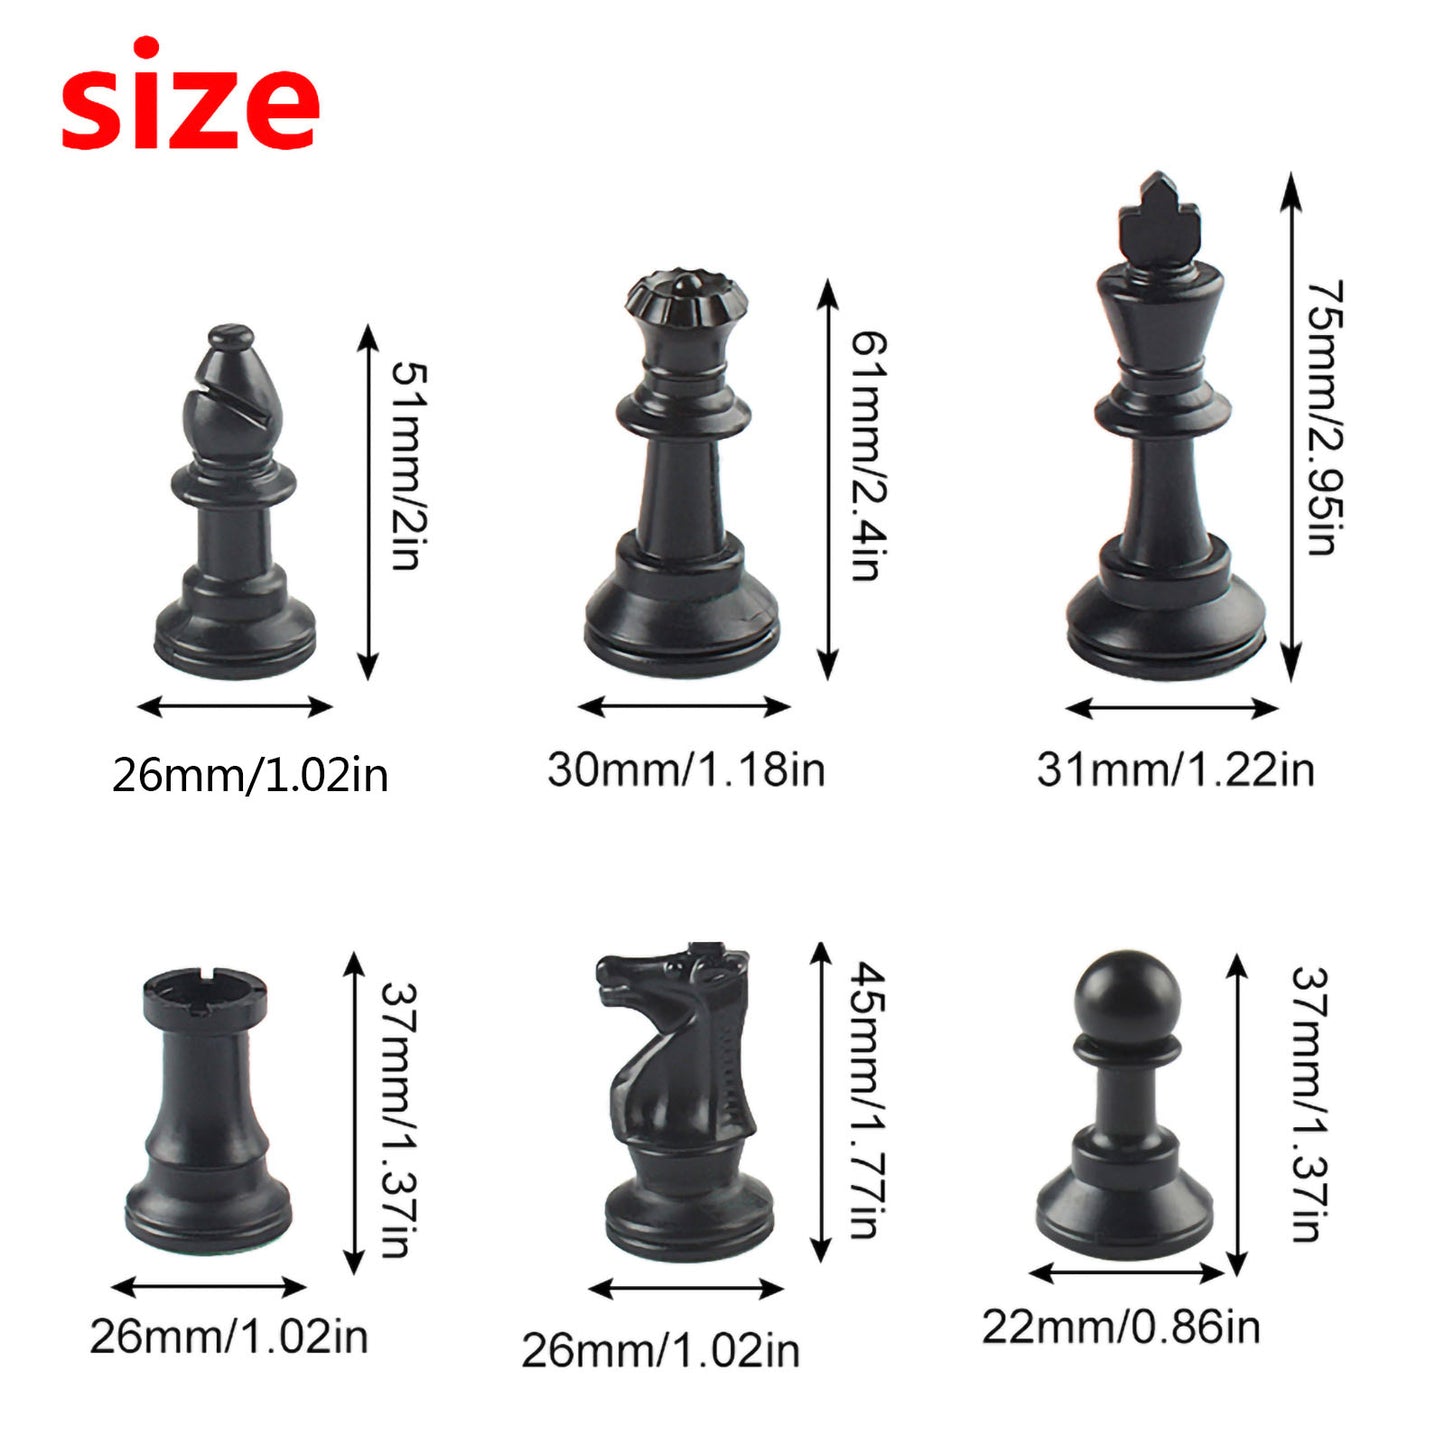 Andux Chess Pieces and Rollable Board QPXQ-01 (Black,42x42cm)